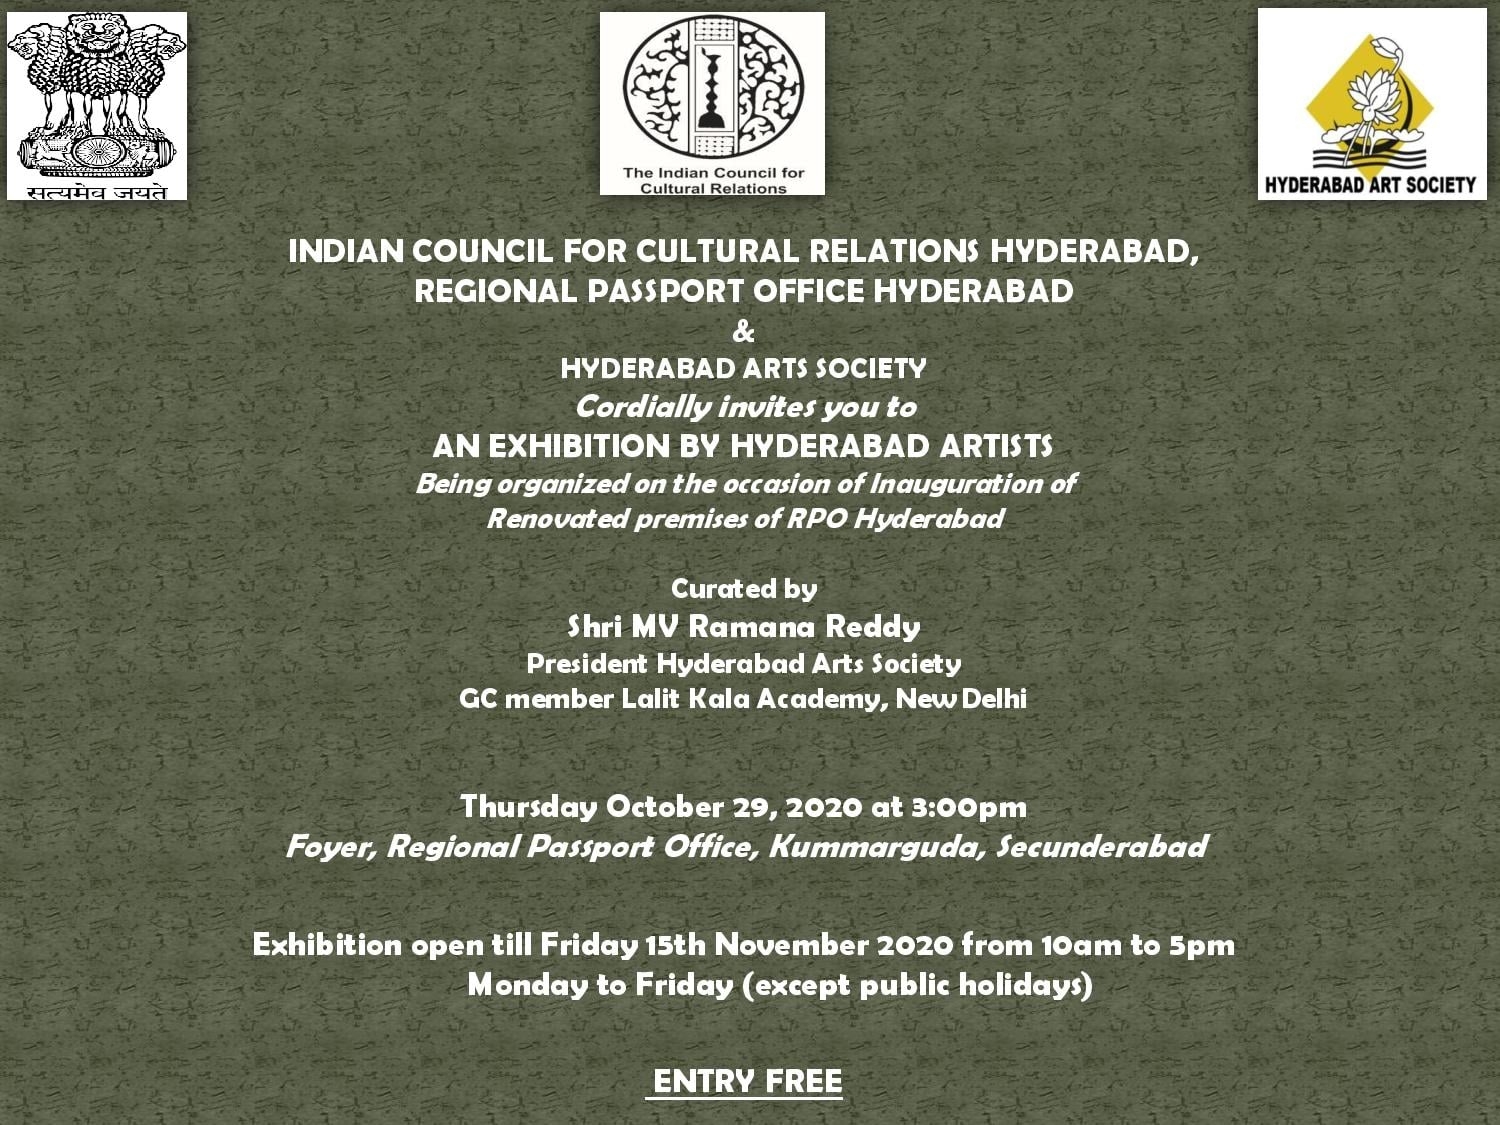 ICCR Hyderabad is organizing an exhibition on the occasion of the inauguration of the renovated premises of Regional Passport Office, Hyderabad